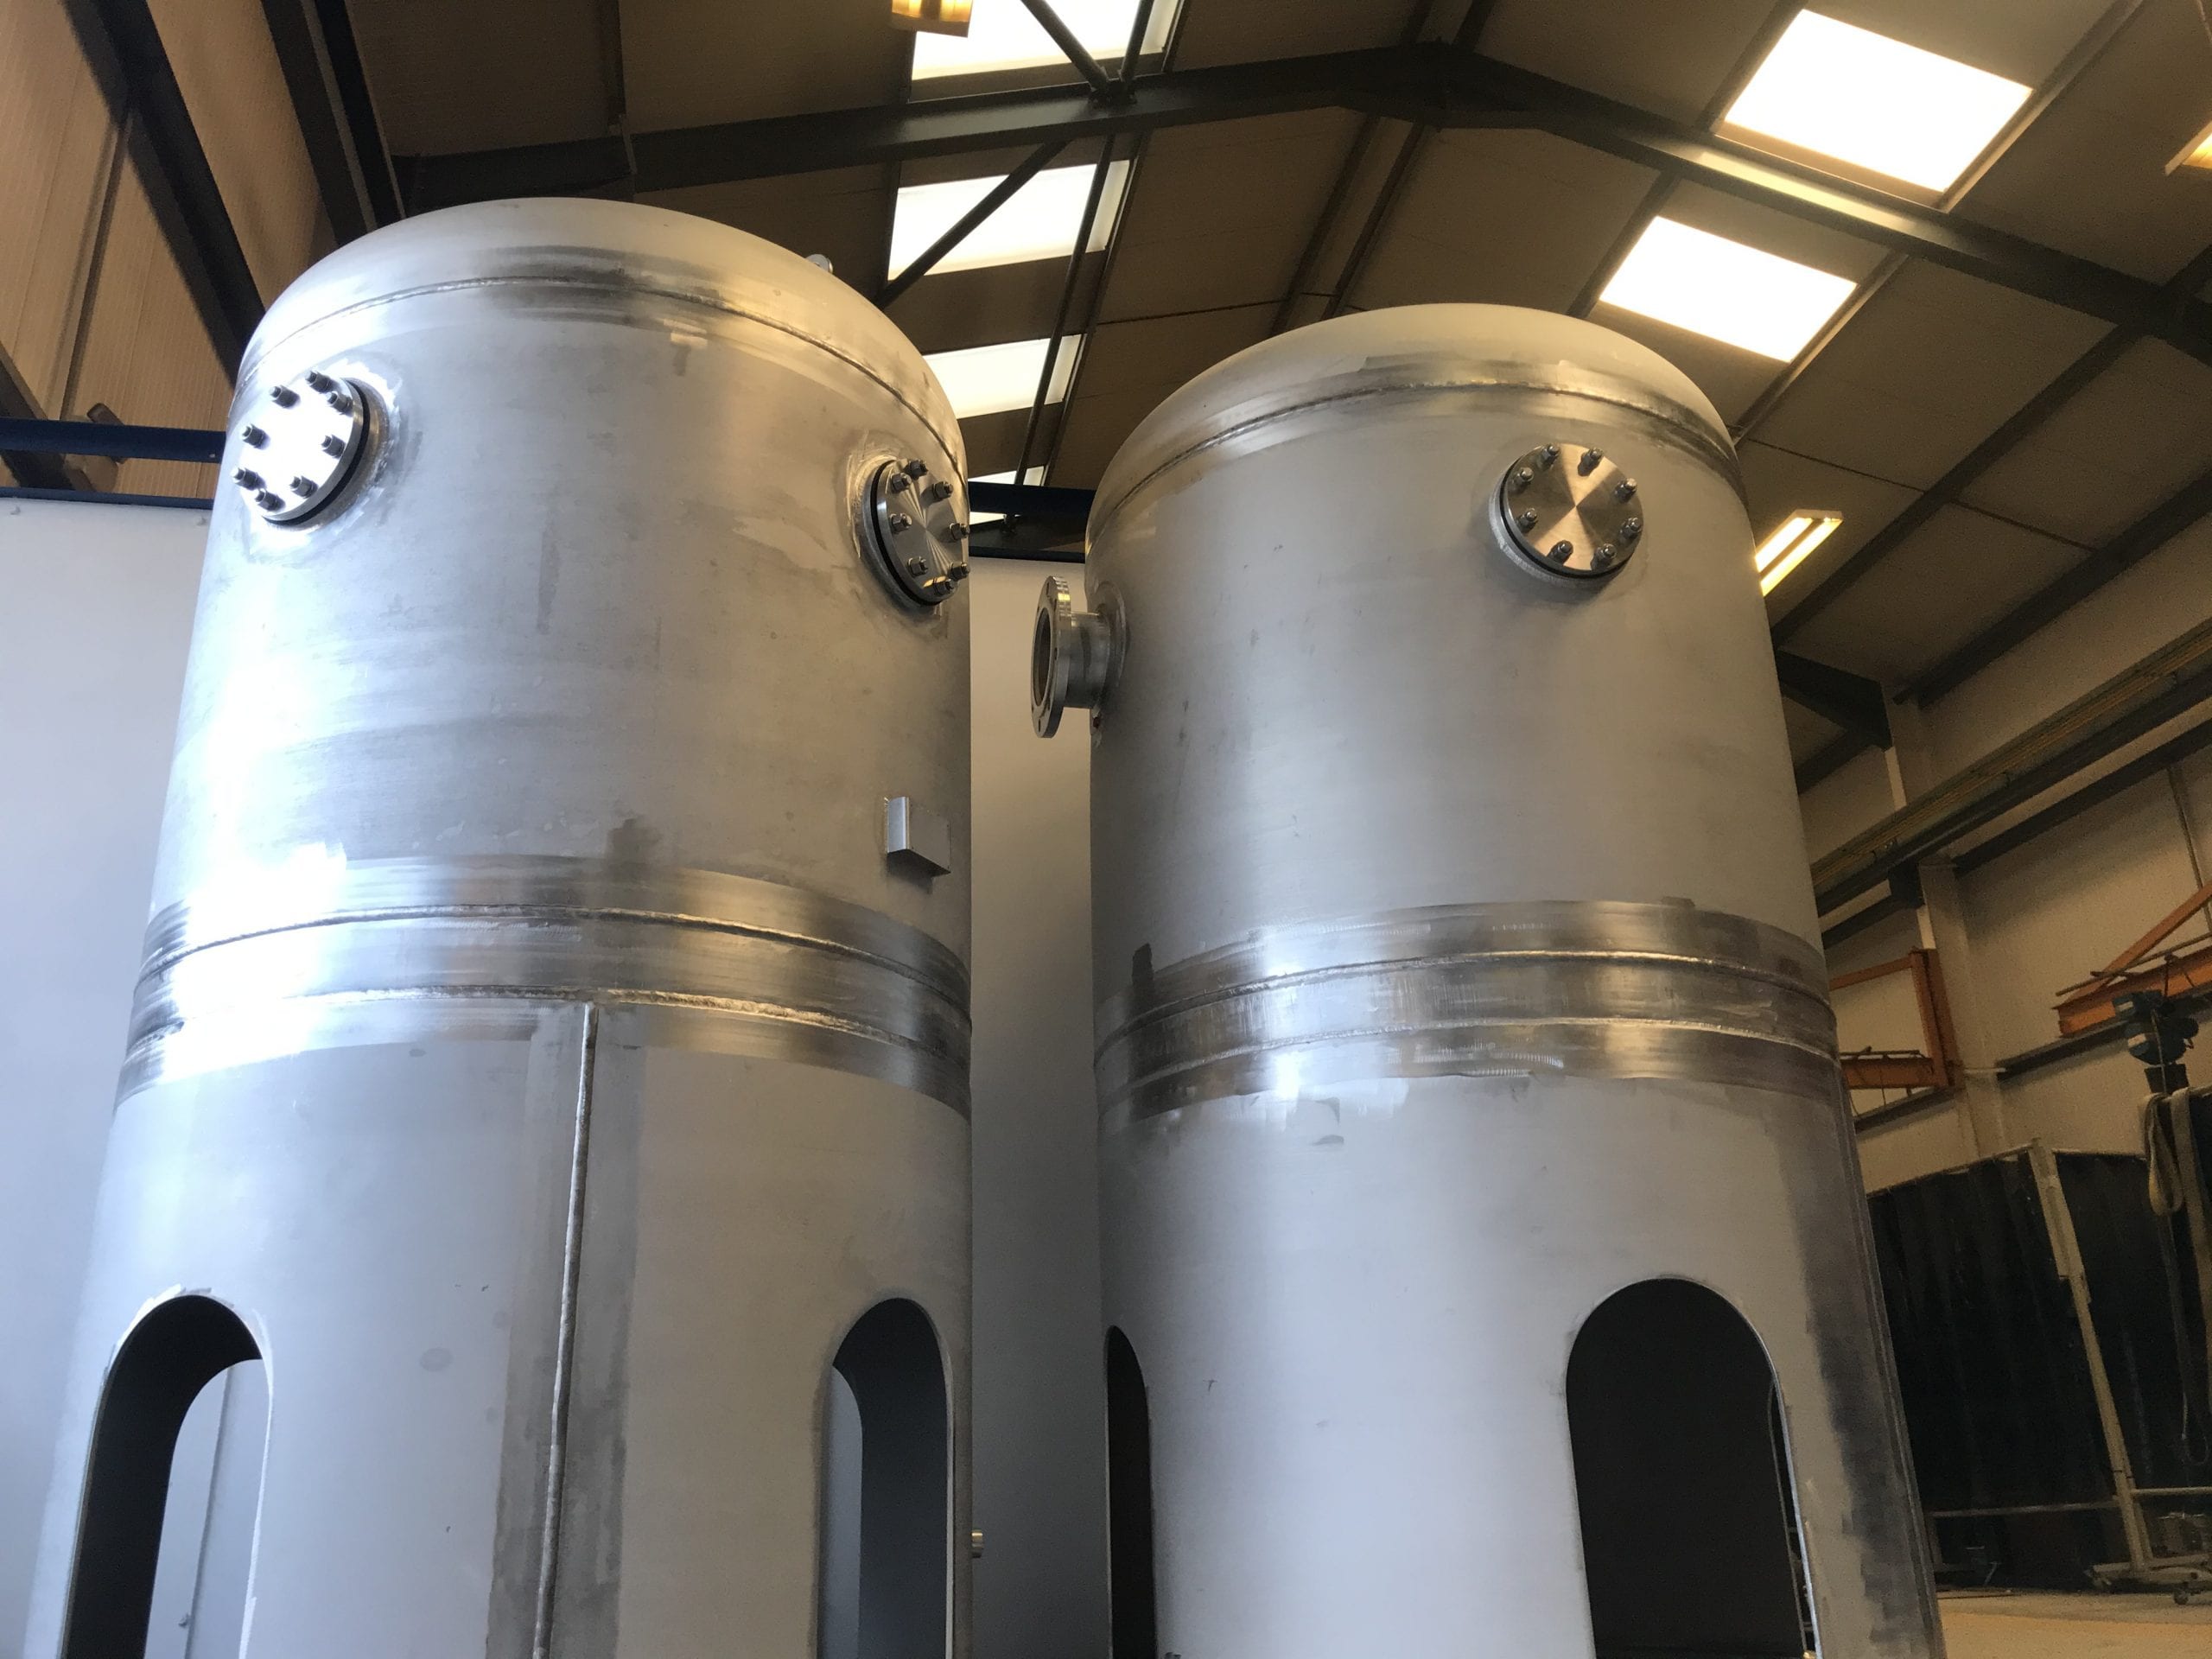 2 off Coolant Break Tanks for a Hydrogen Project - 2000 Litre volume made from Stainless Steel 304